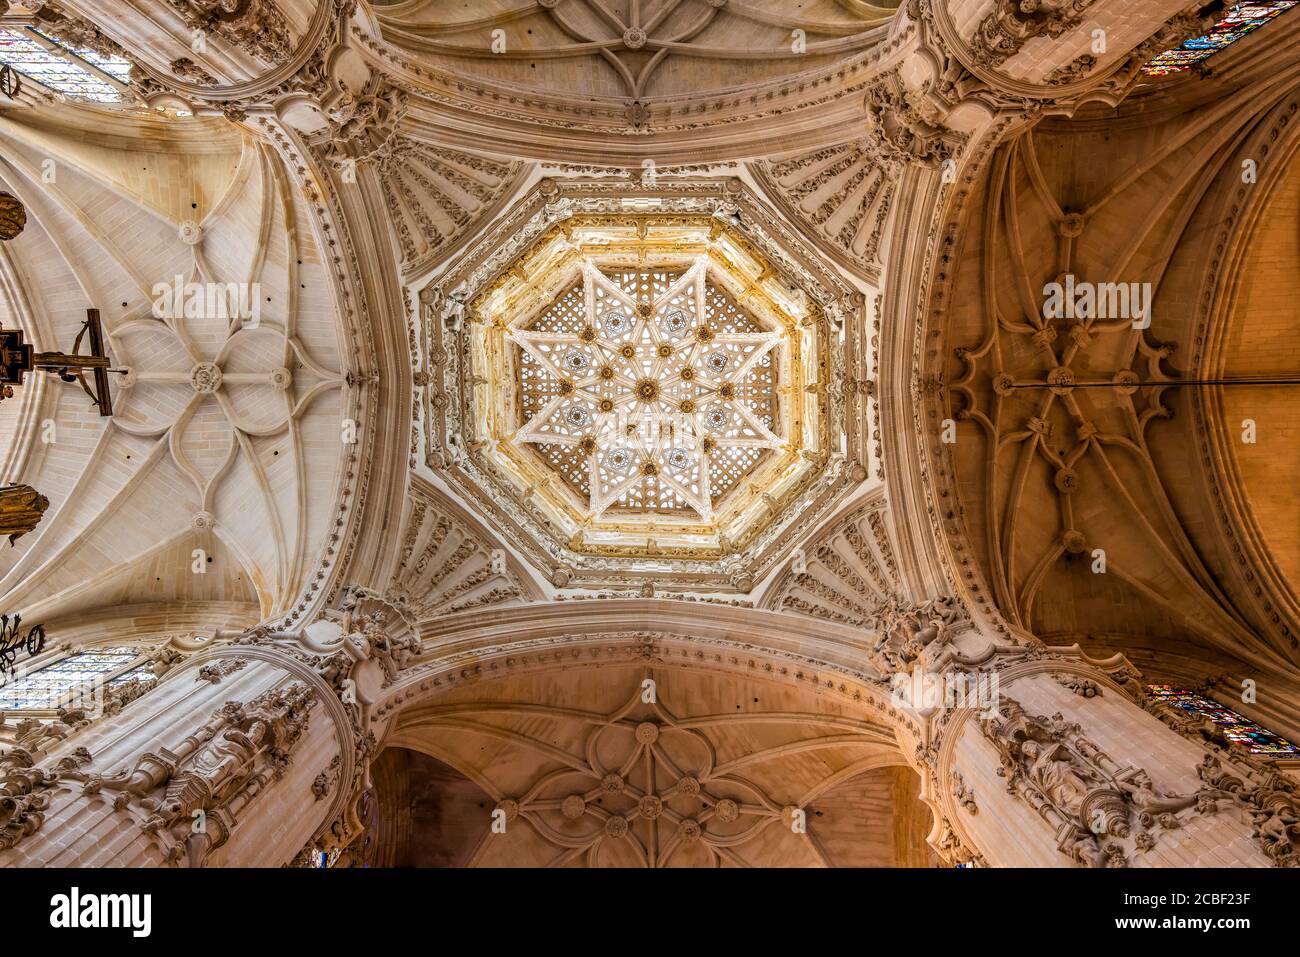 Ceiling and main dome, Cathedral of Saint Mary of Burgos, Burgos, Castile and Leon, Spain Stock Photo